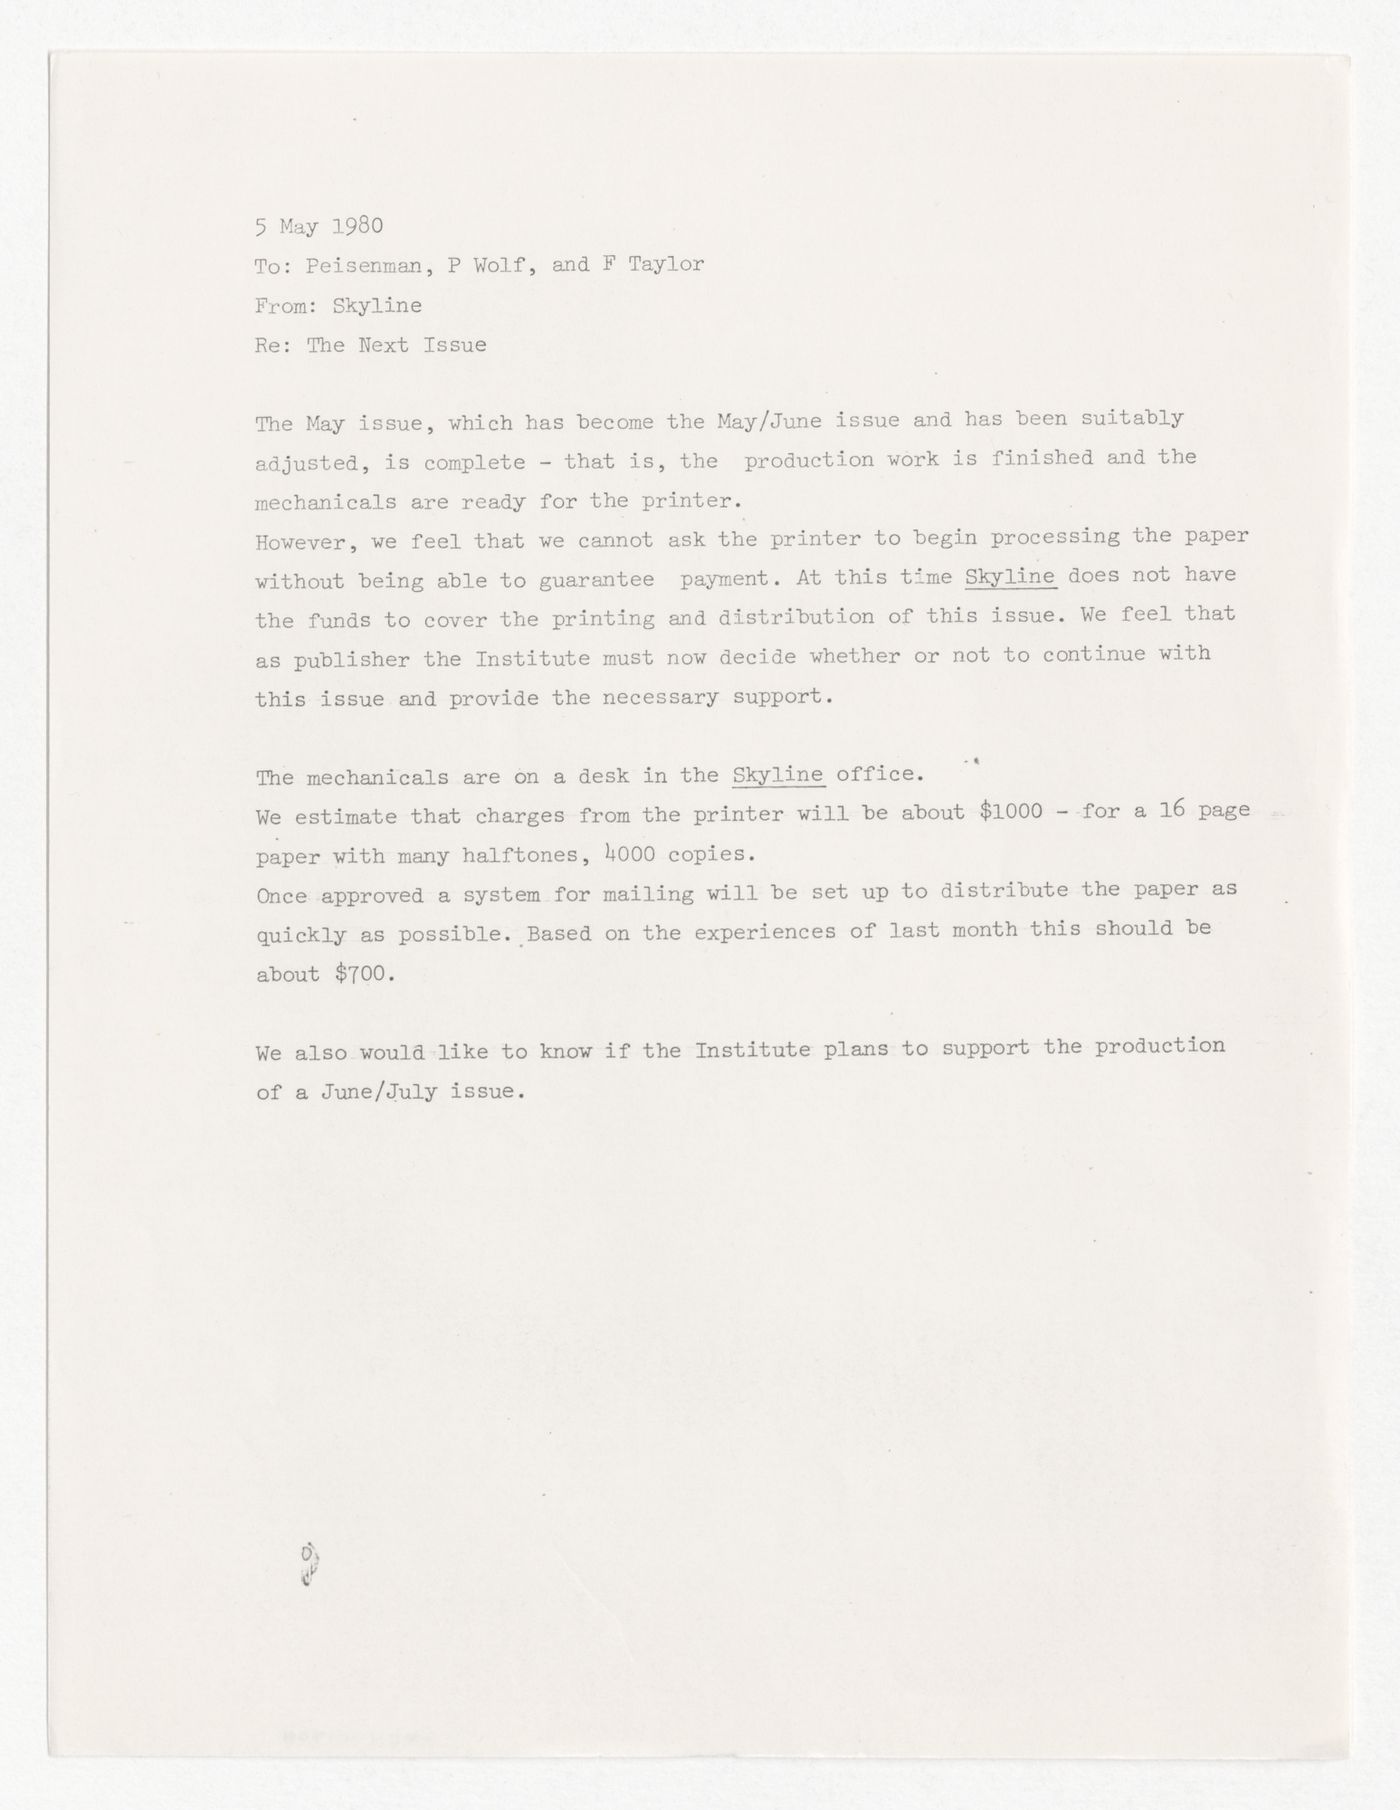 Memorandum to Peter D. Eisenman, Peter Wolf and Frederieke Taylor about Skyline May-June issue